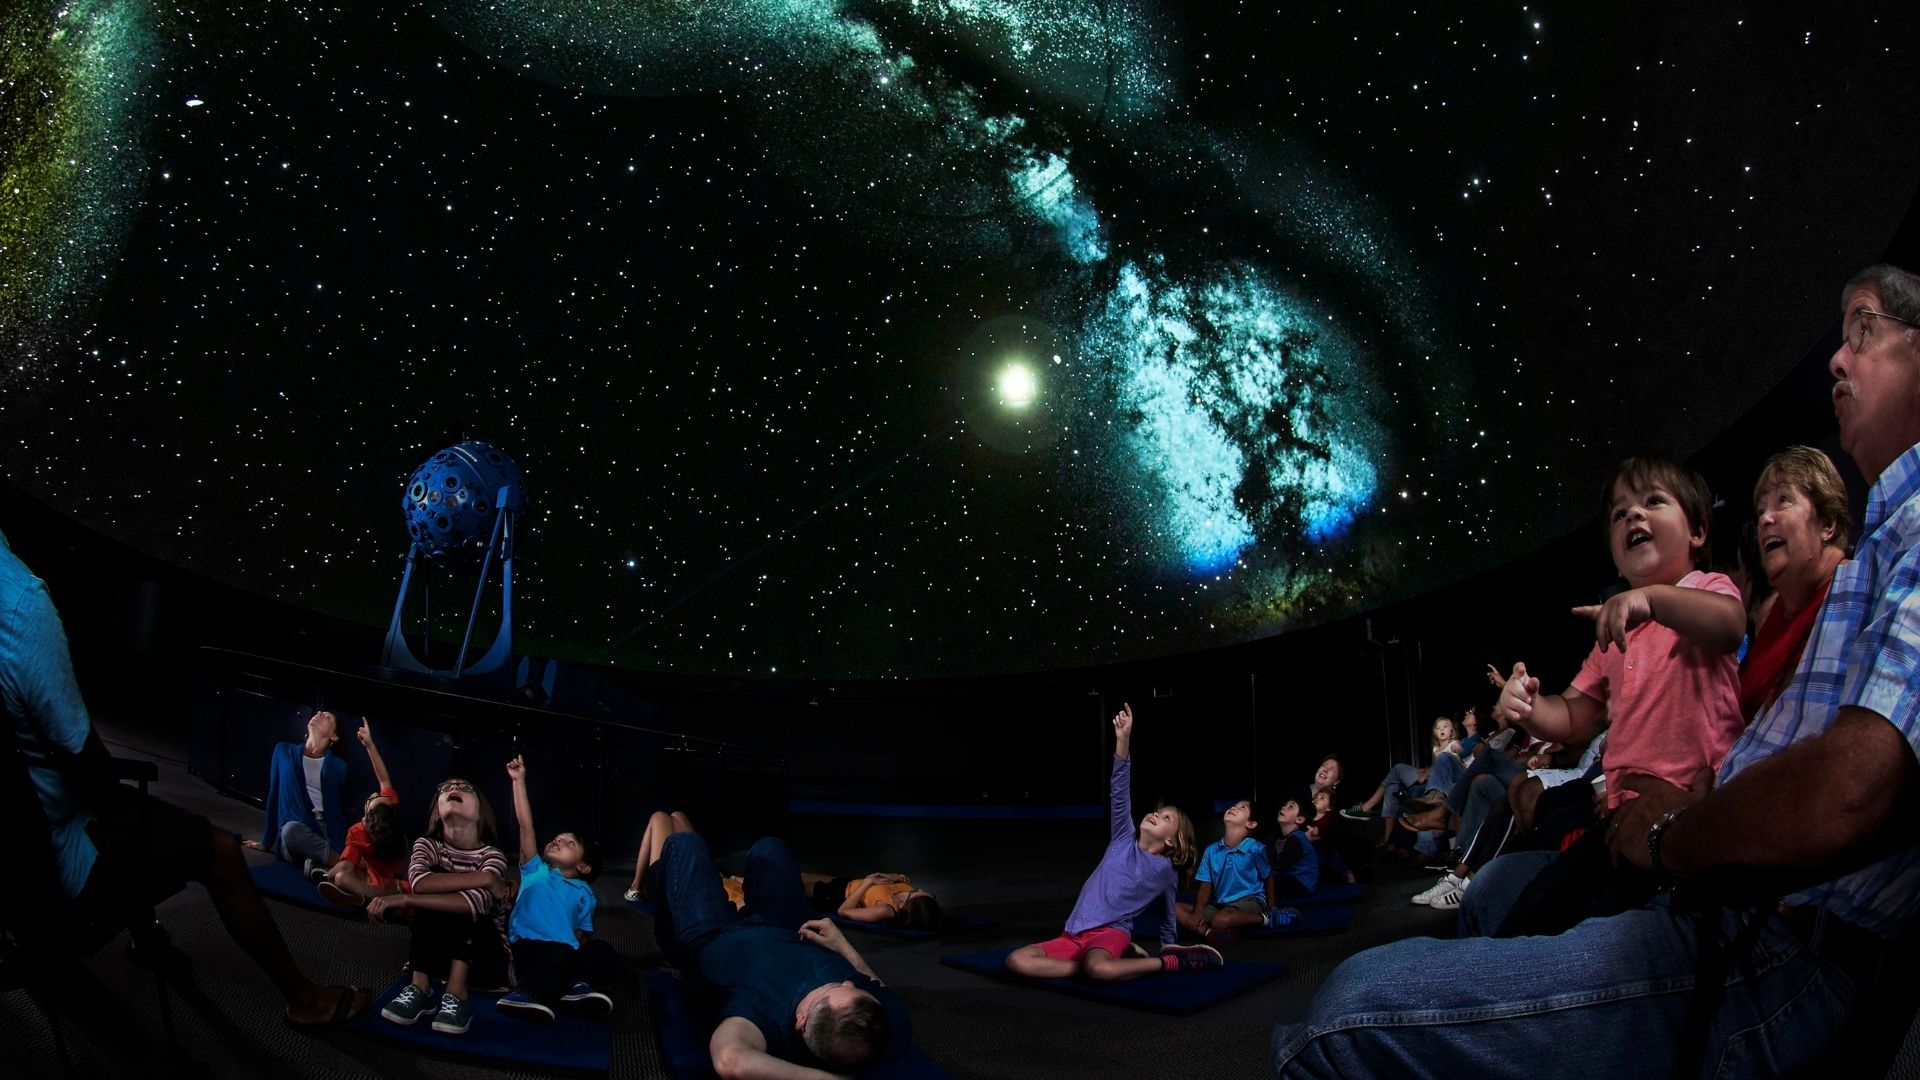 People of all ages marvel at the night sky at the Saint Louis Science Center, where STEAM activities abound.